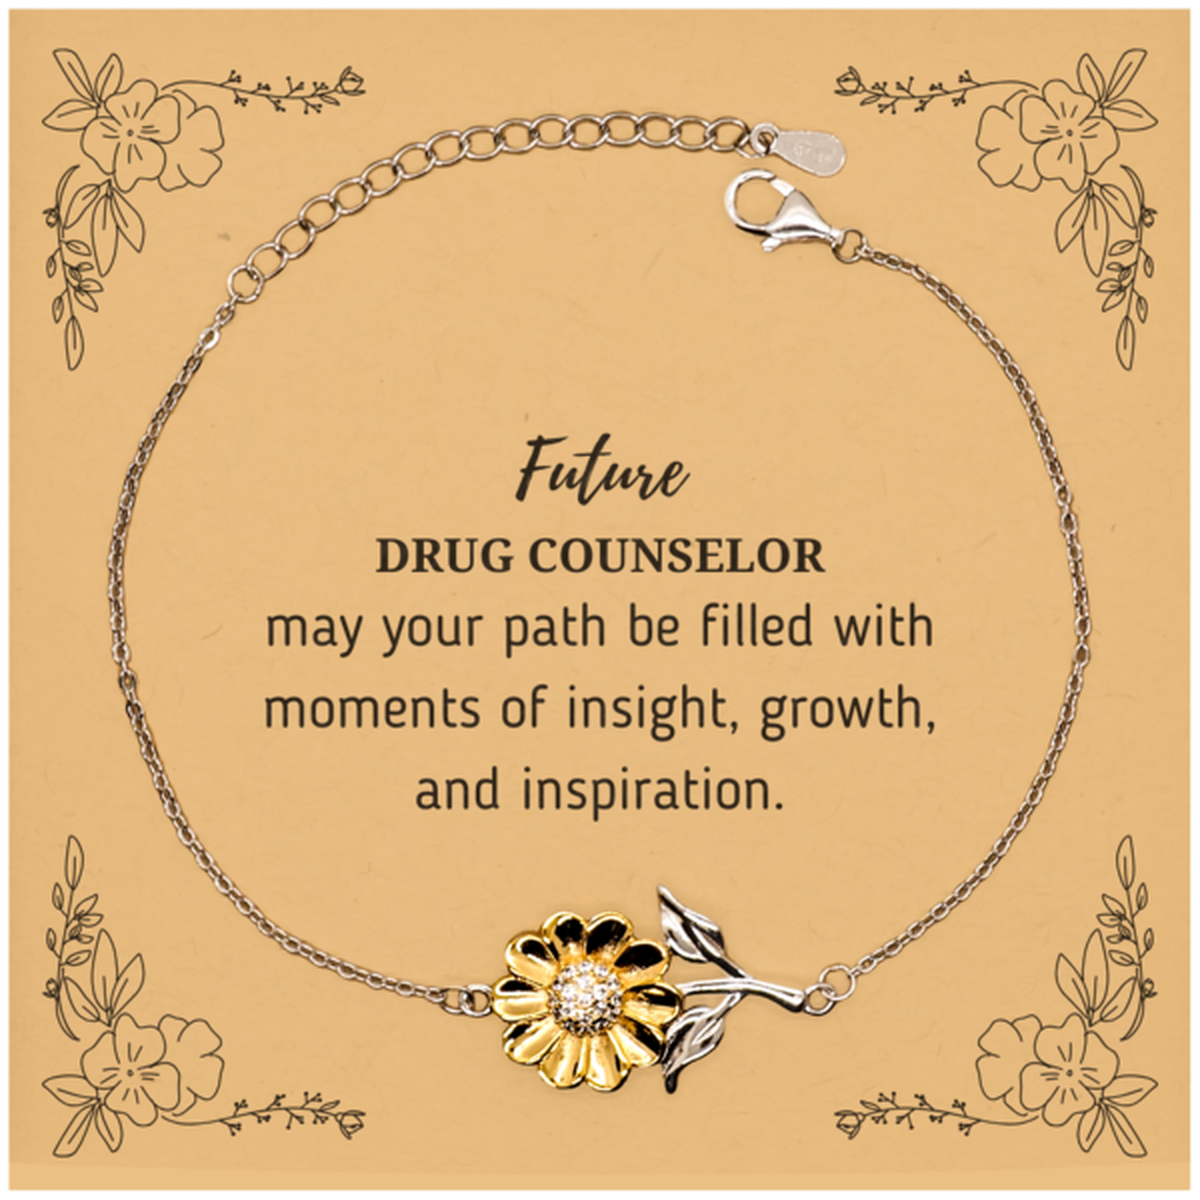 Future Drug Counselor Gifts, May your path be filled with moments of insight, Graduation Gifts for New Drug Counselor, Christmas Unique Sunflower Bracelet For Men, Women, Friends